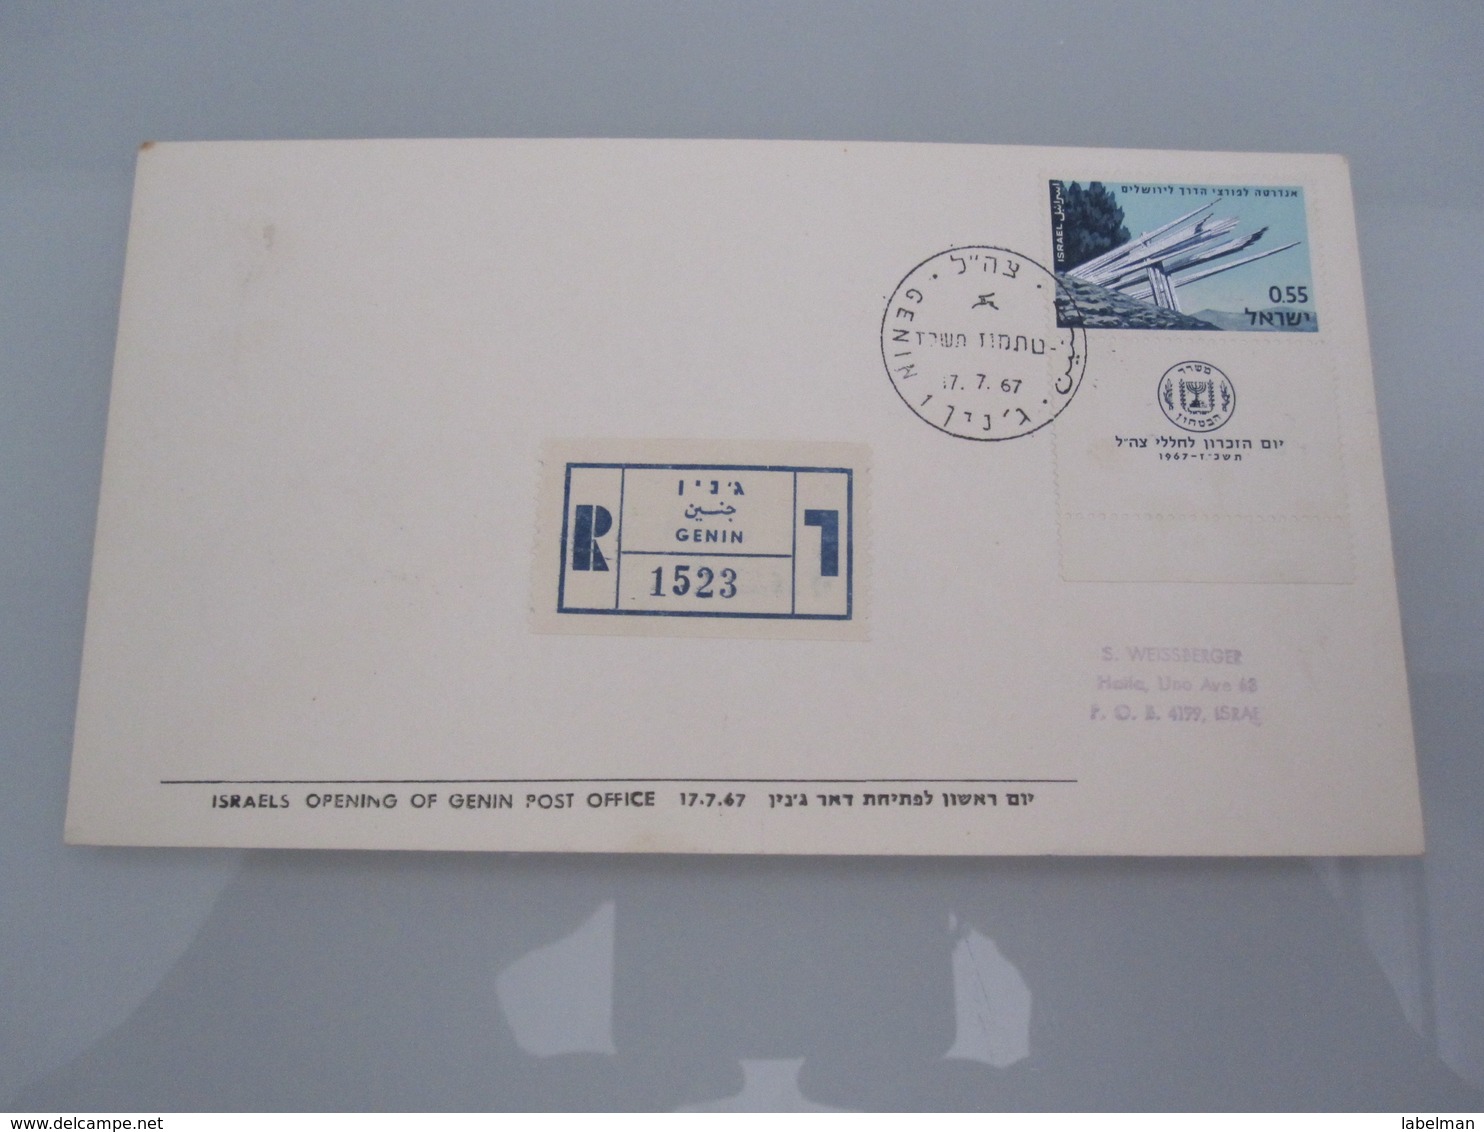 1967 POO FIRST DAY POST OFFICE OPENING MILITARY GOVERNMENT GENIN JENIN JORDAN 6 DAYS WAR COVER ISRAEL CACHET - Covers & Documents